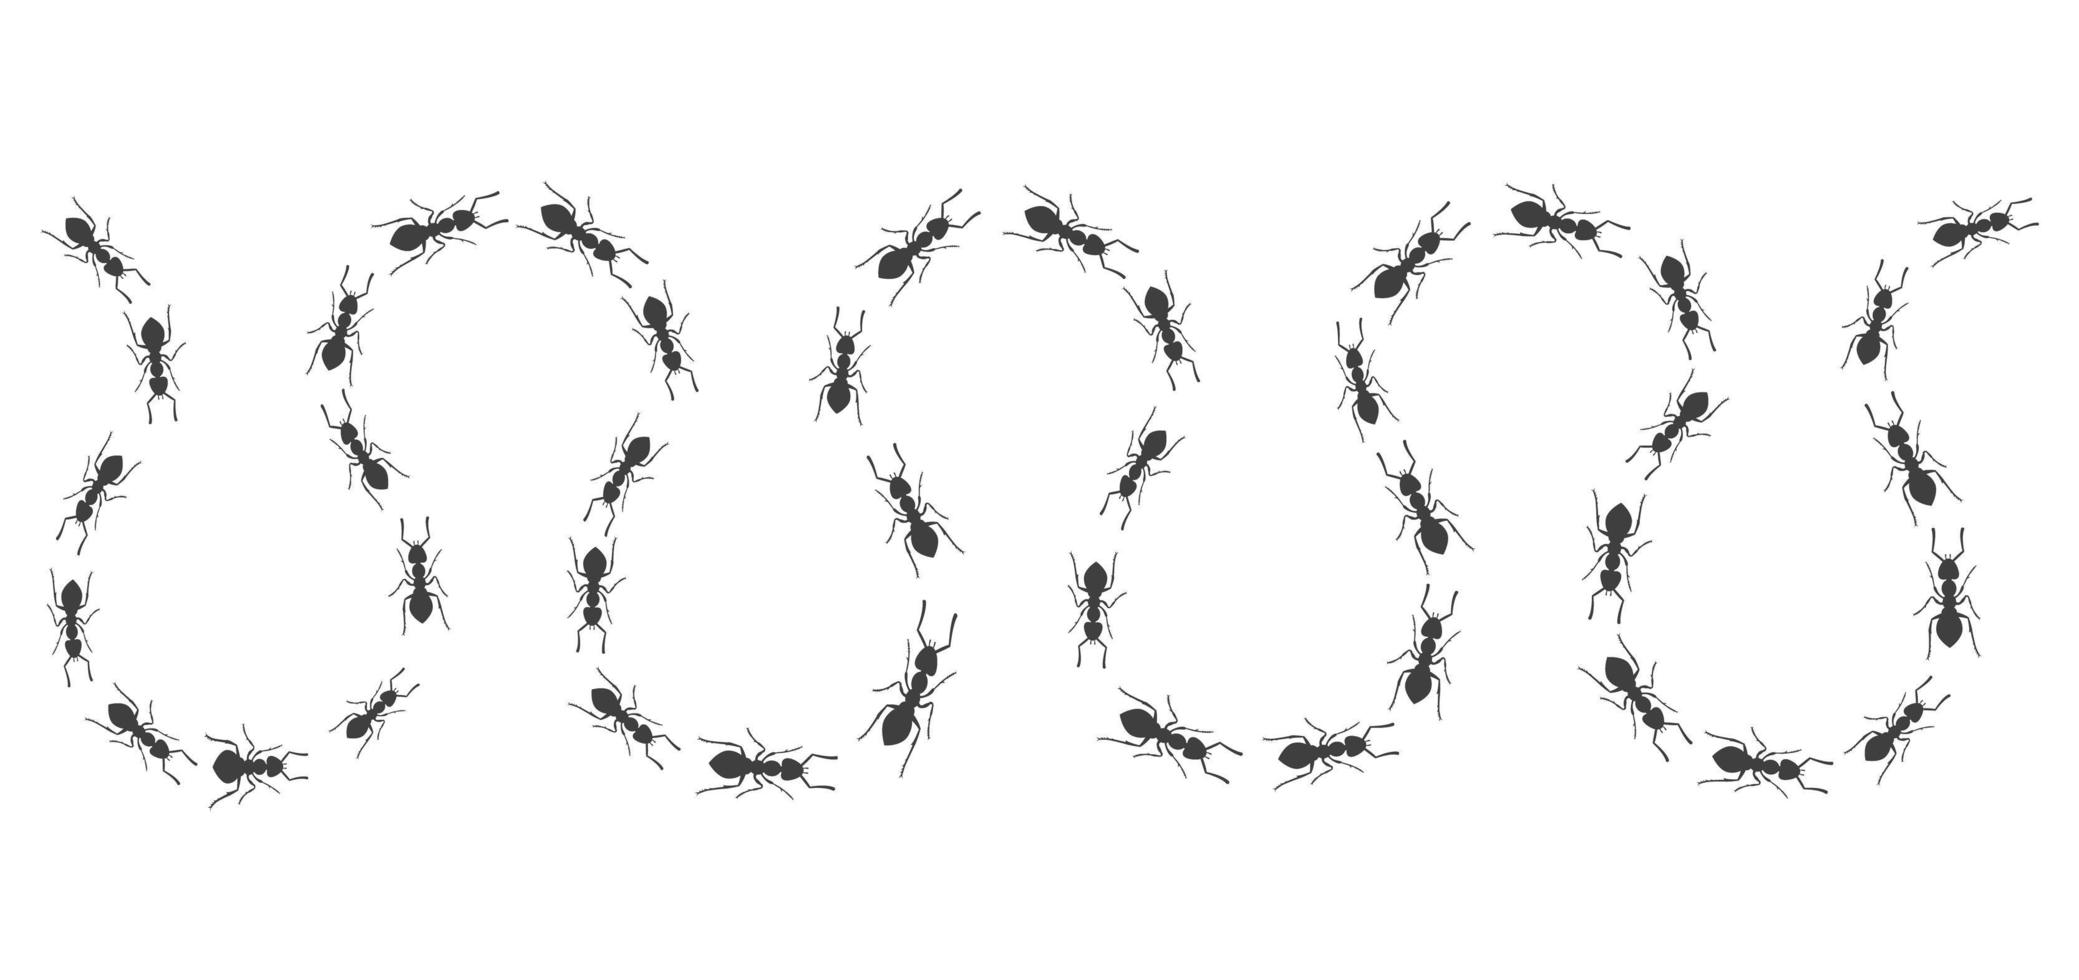 A winding trail of ants. Insects march along the line. Vector